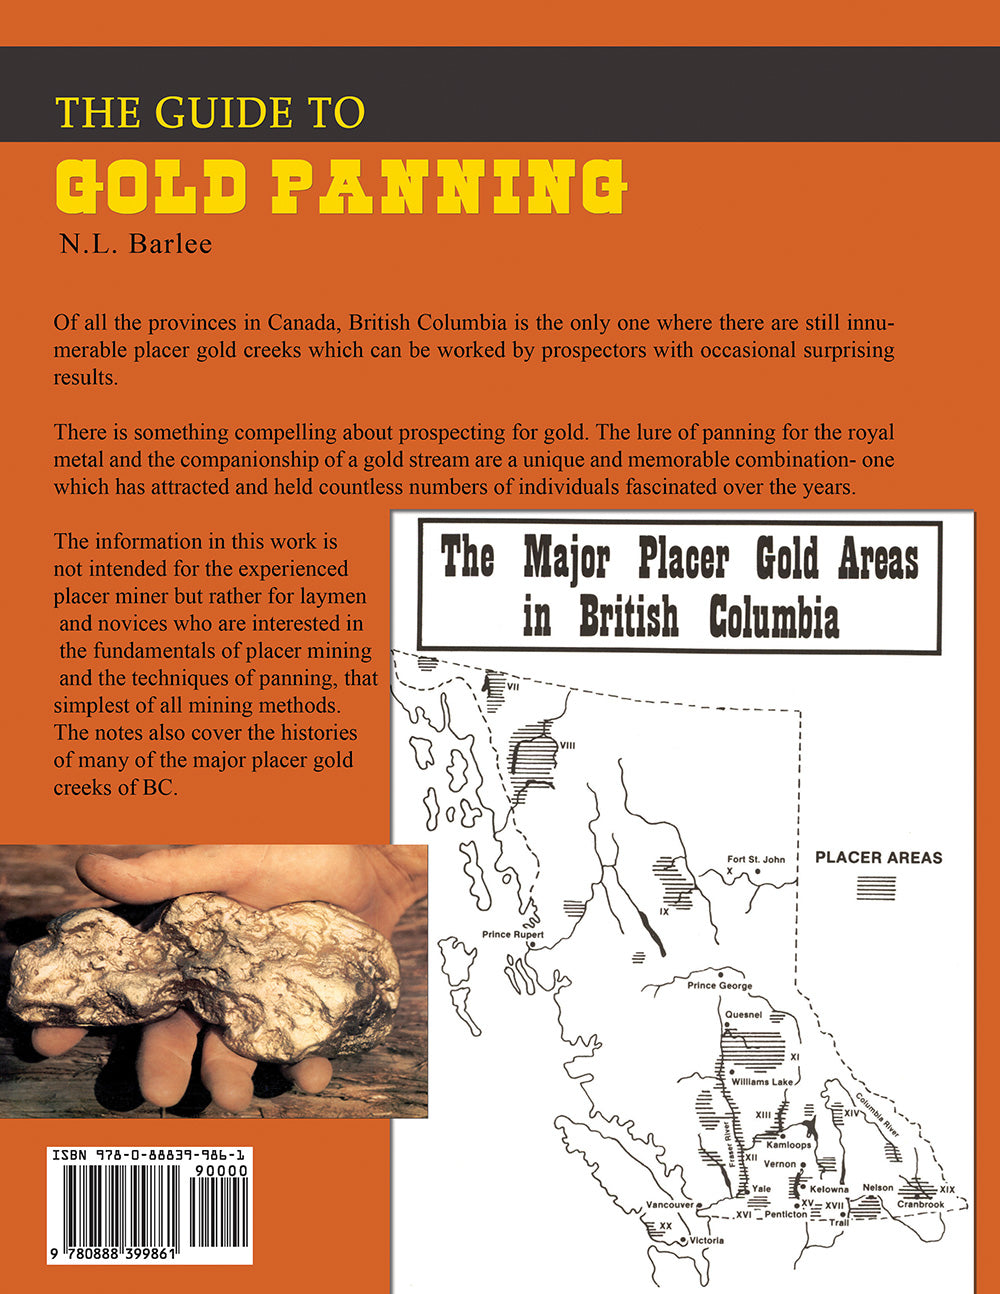 The Guide to Gold Panning